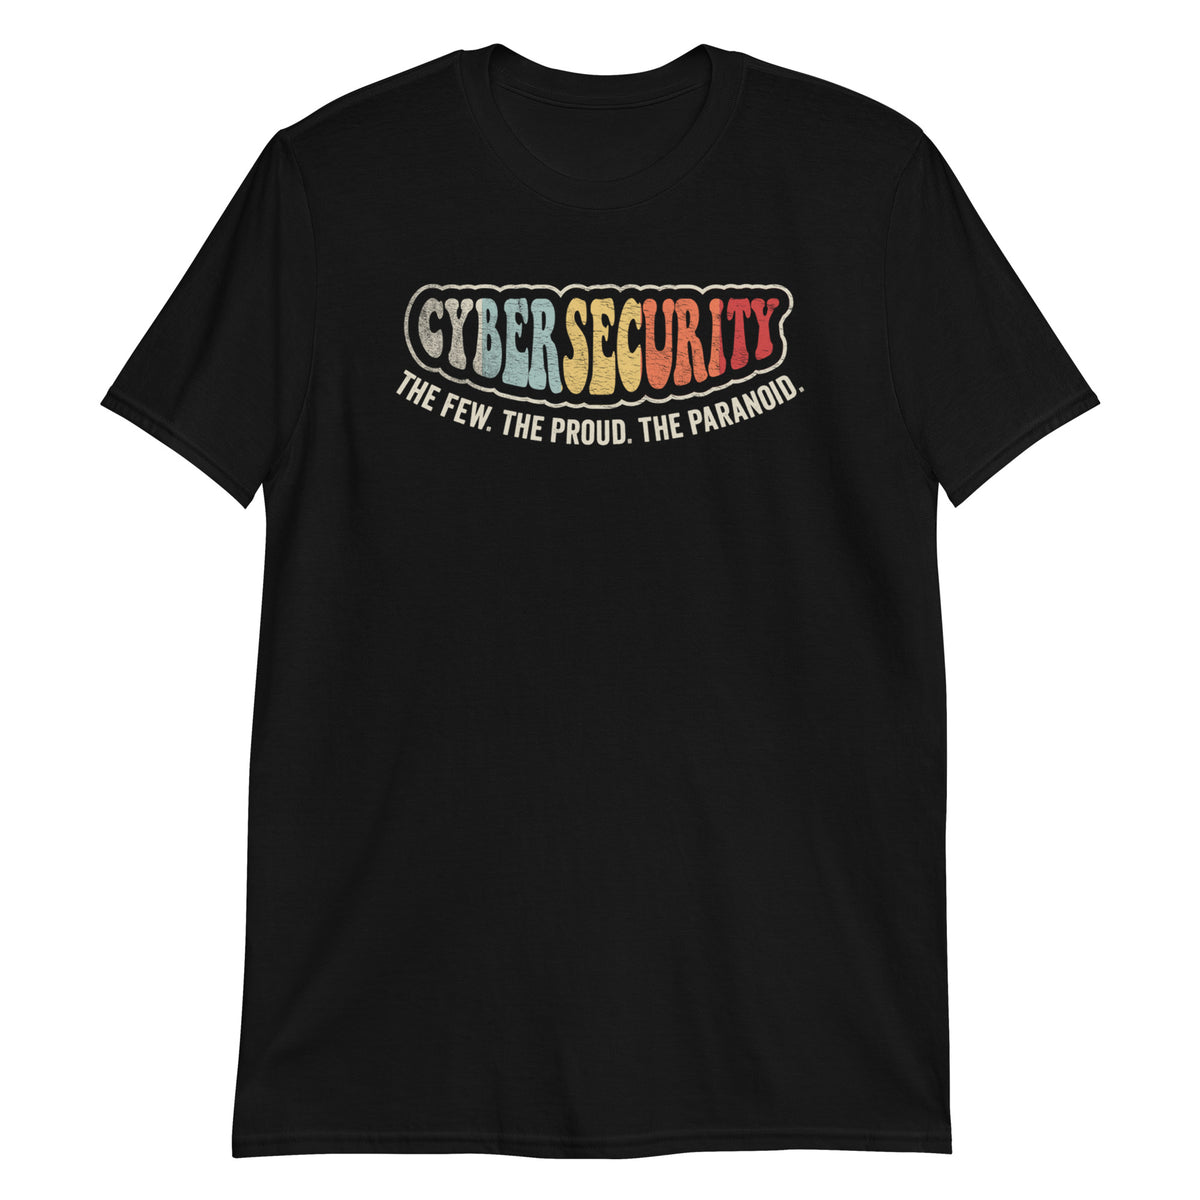 Cybersecurity The Few The Proud The Paranoid T-Shirt